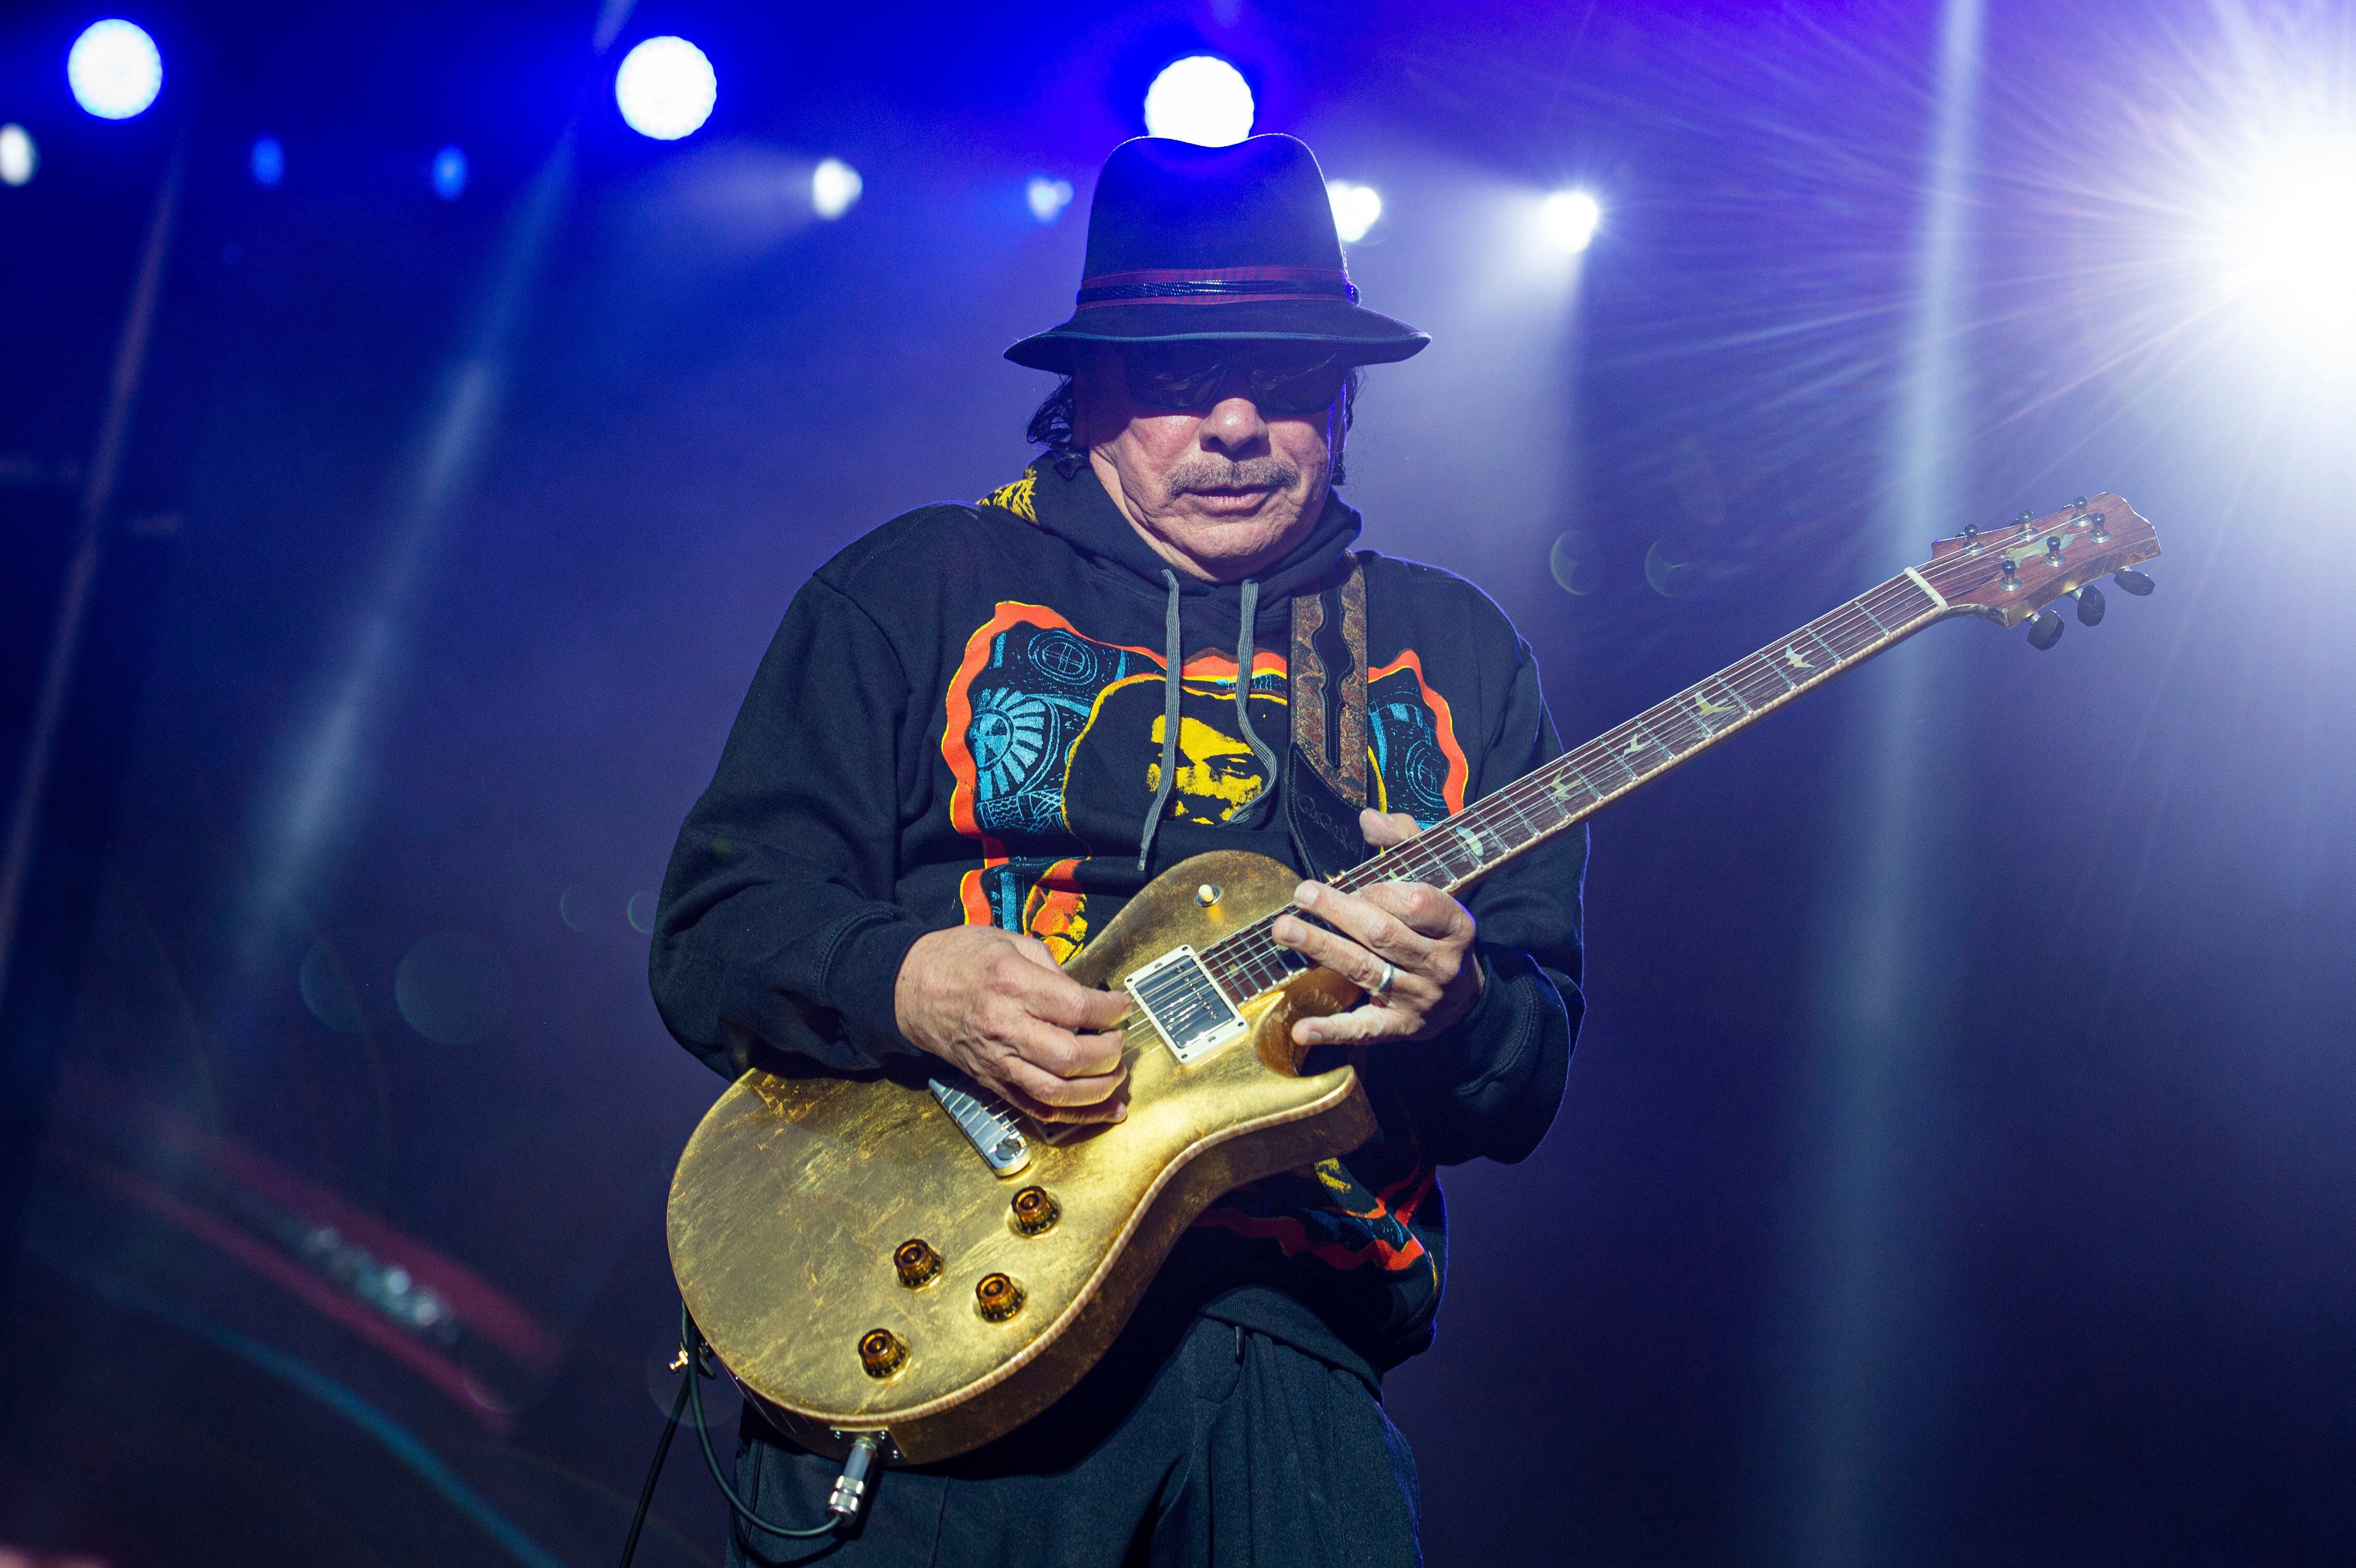 Rocker Carlos Santana ‘doing well’ after collapsing onstage